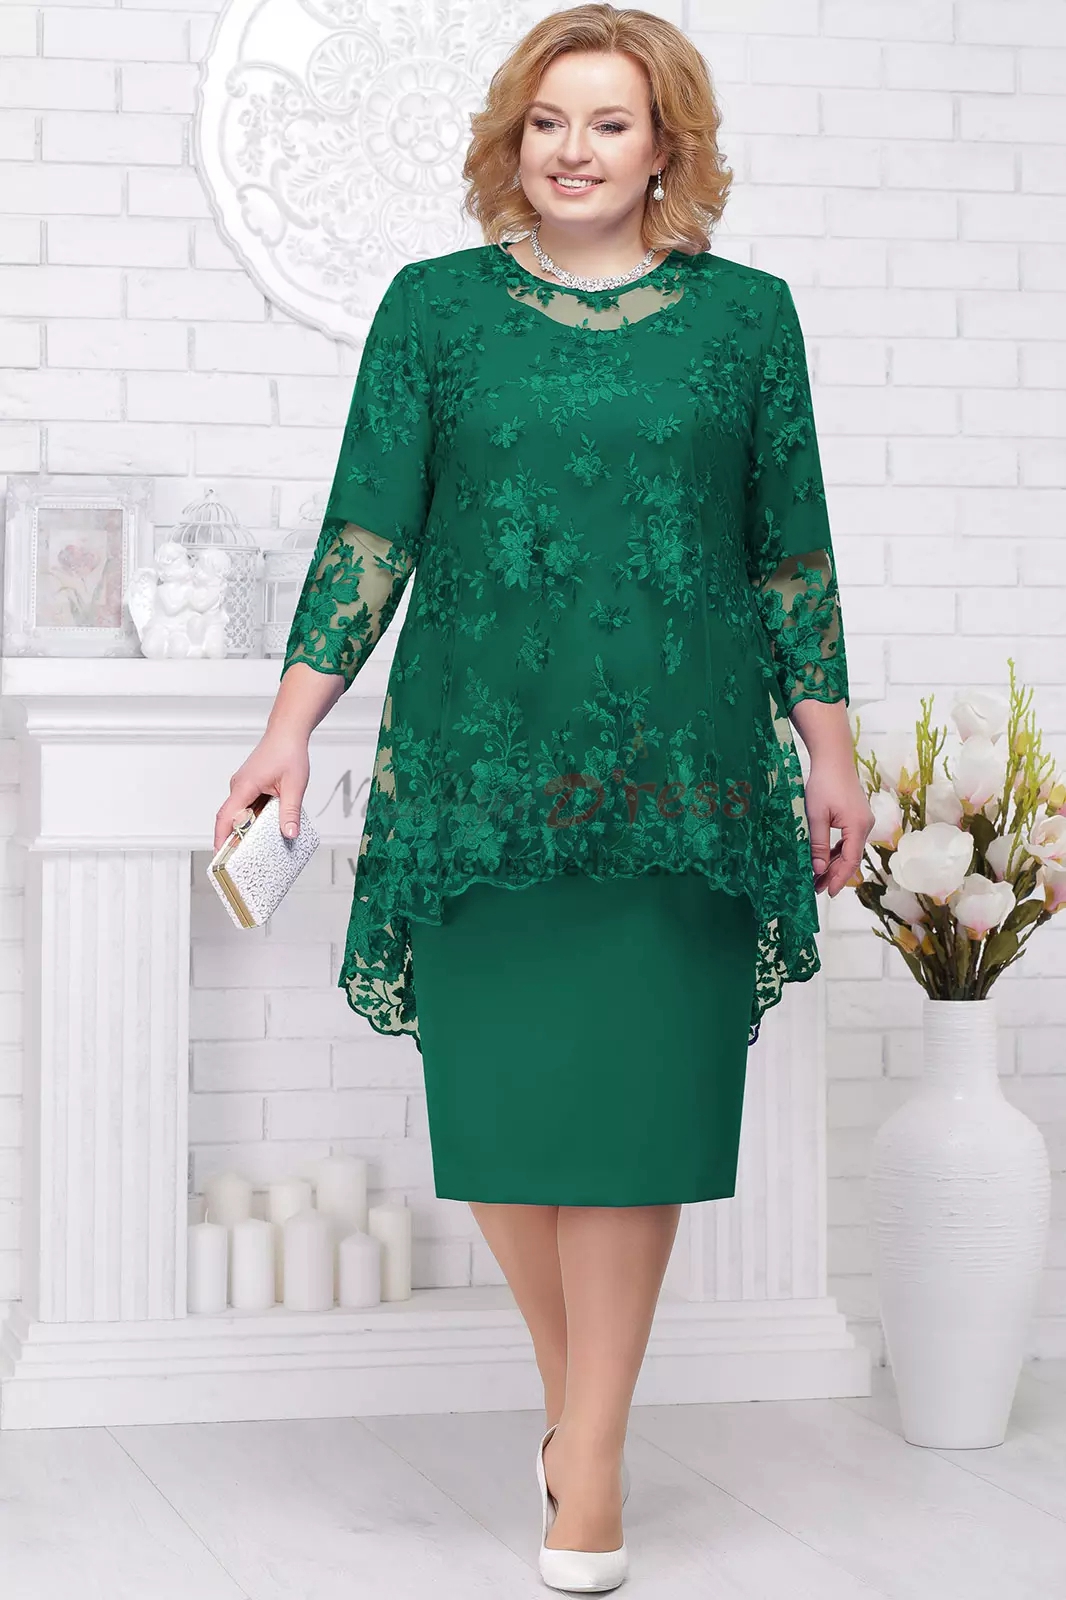 Knee Length Plus Size Mother Of The Bride Chiffon Dress With Lace Overlay Grenn 2 